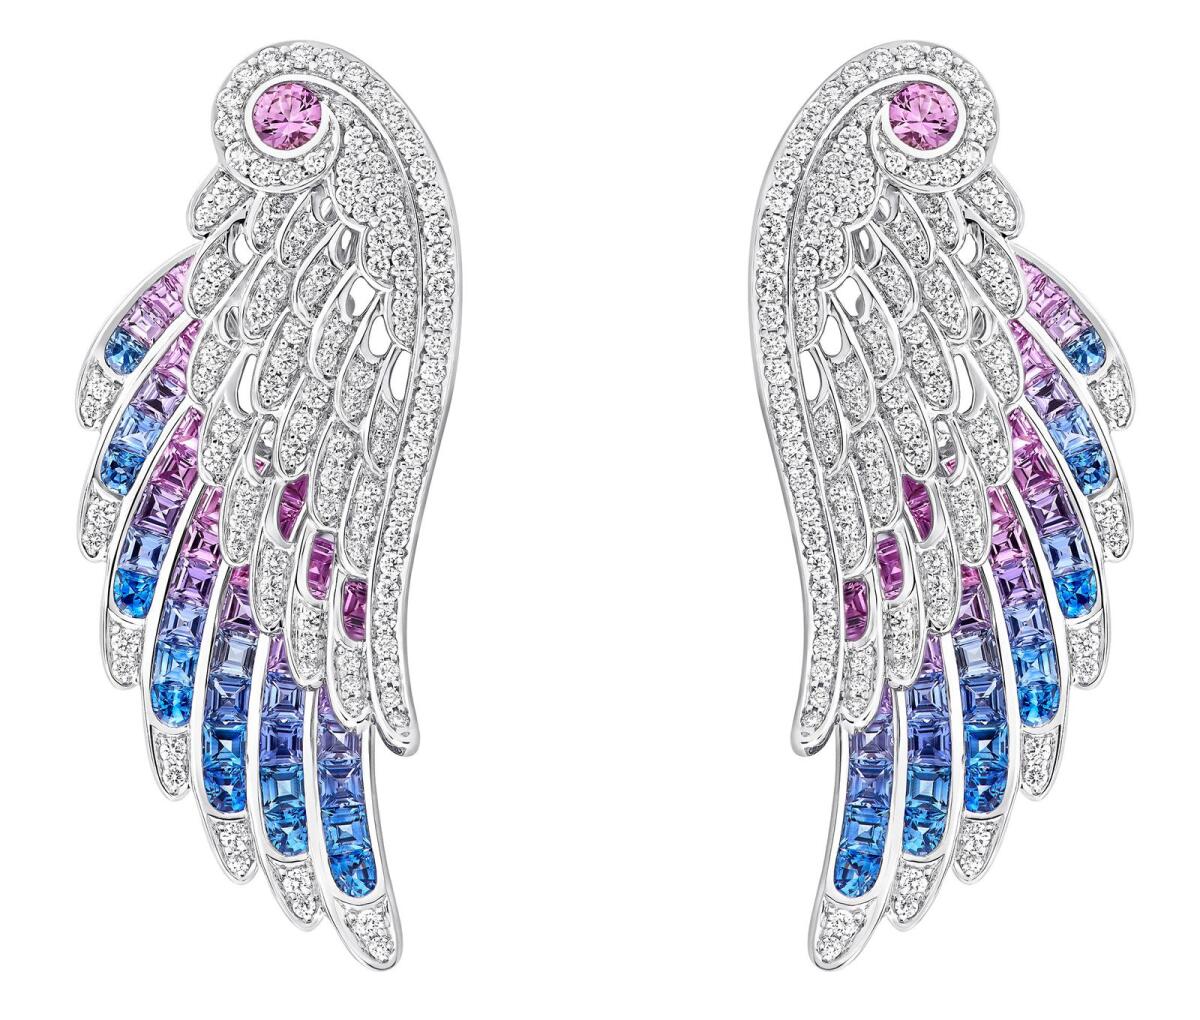 Commemorate Eid with these Wings Embrace Bird of Paradise Drop Earrings from Garrard. Dh135,000